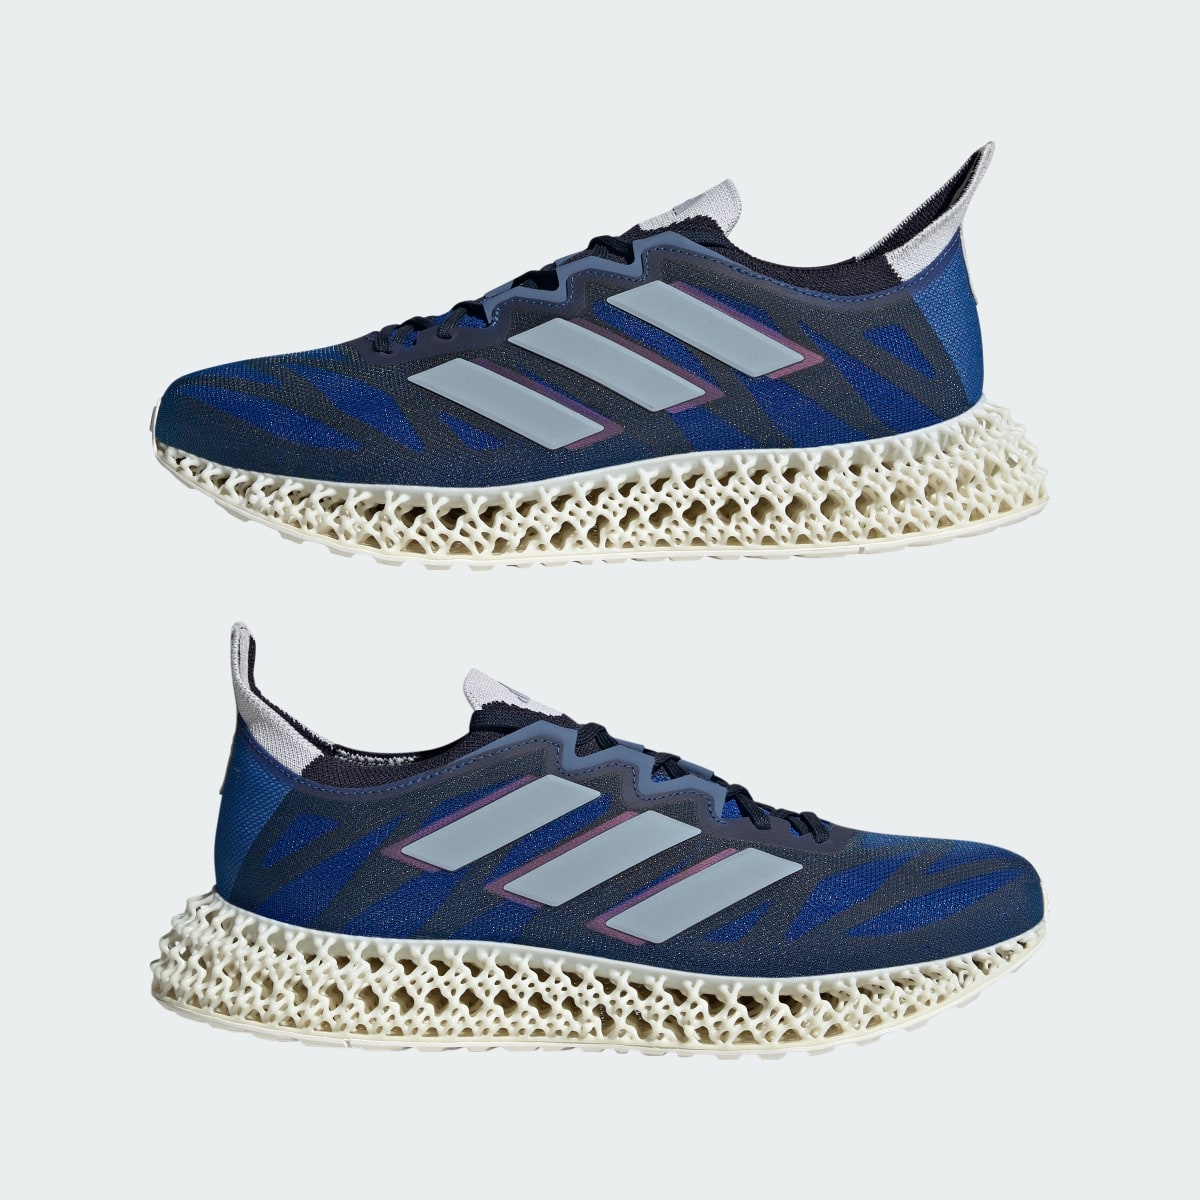 Adidas 4DFWD 3 Running Shoes. 11